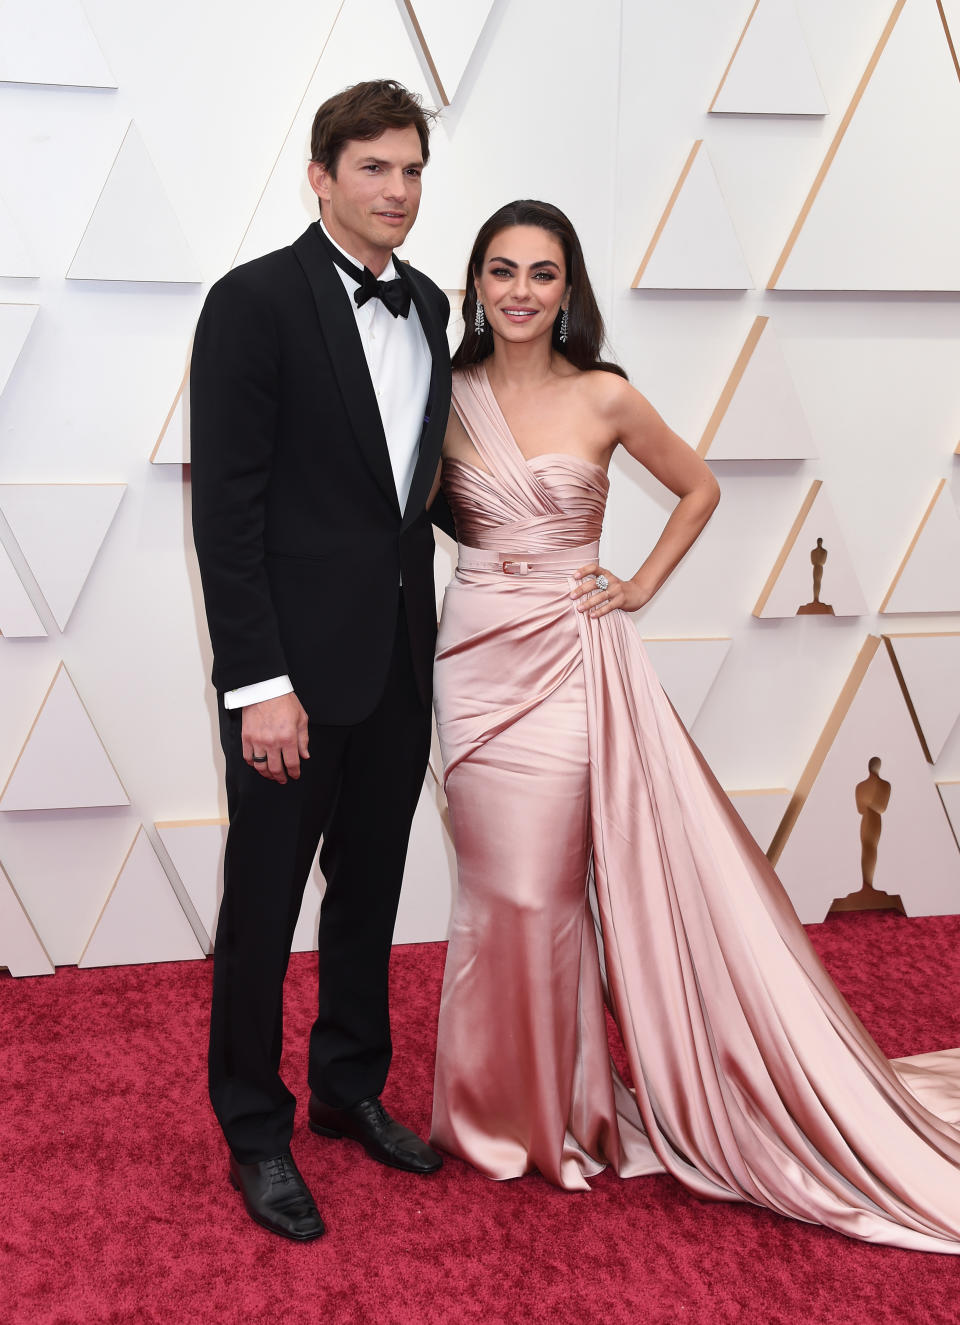 Mila Kunis and Ashton Kutcher at the 94th Academy Awards held at Dolby Theatre at the Hollywood & Highland Center on March 27th, 2022 in Los Angeles, California. (Photo by Gilbert Flores/Variety/Penske Media via Getty Images)